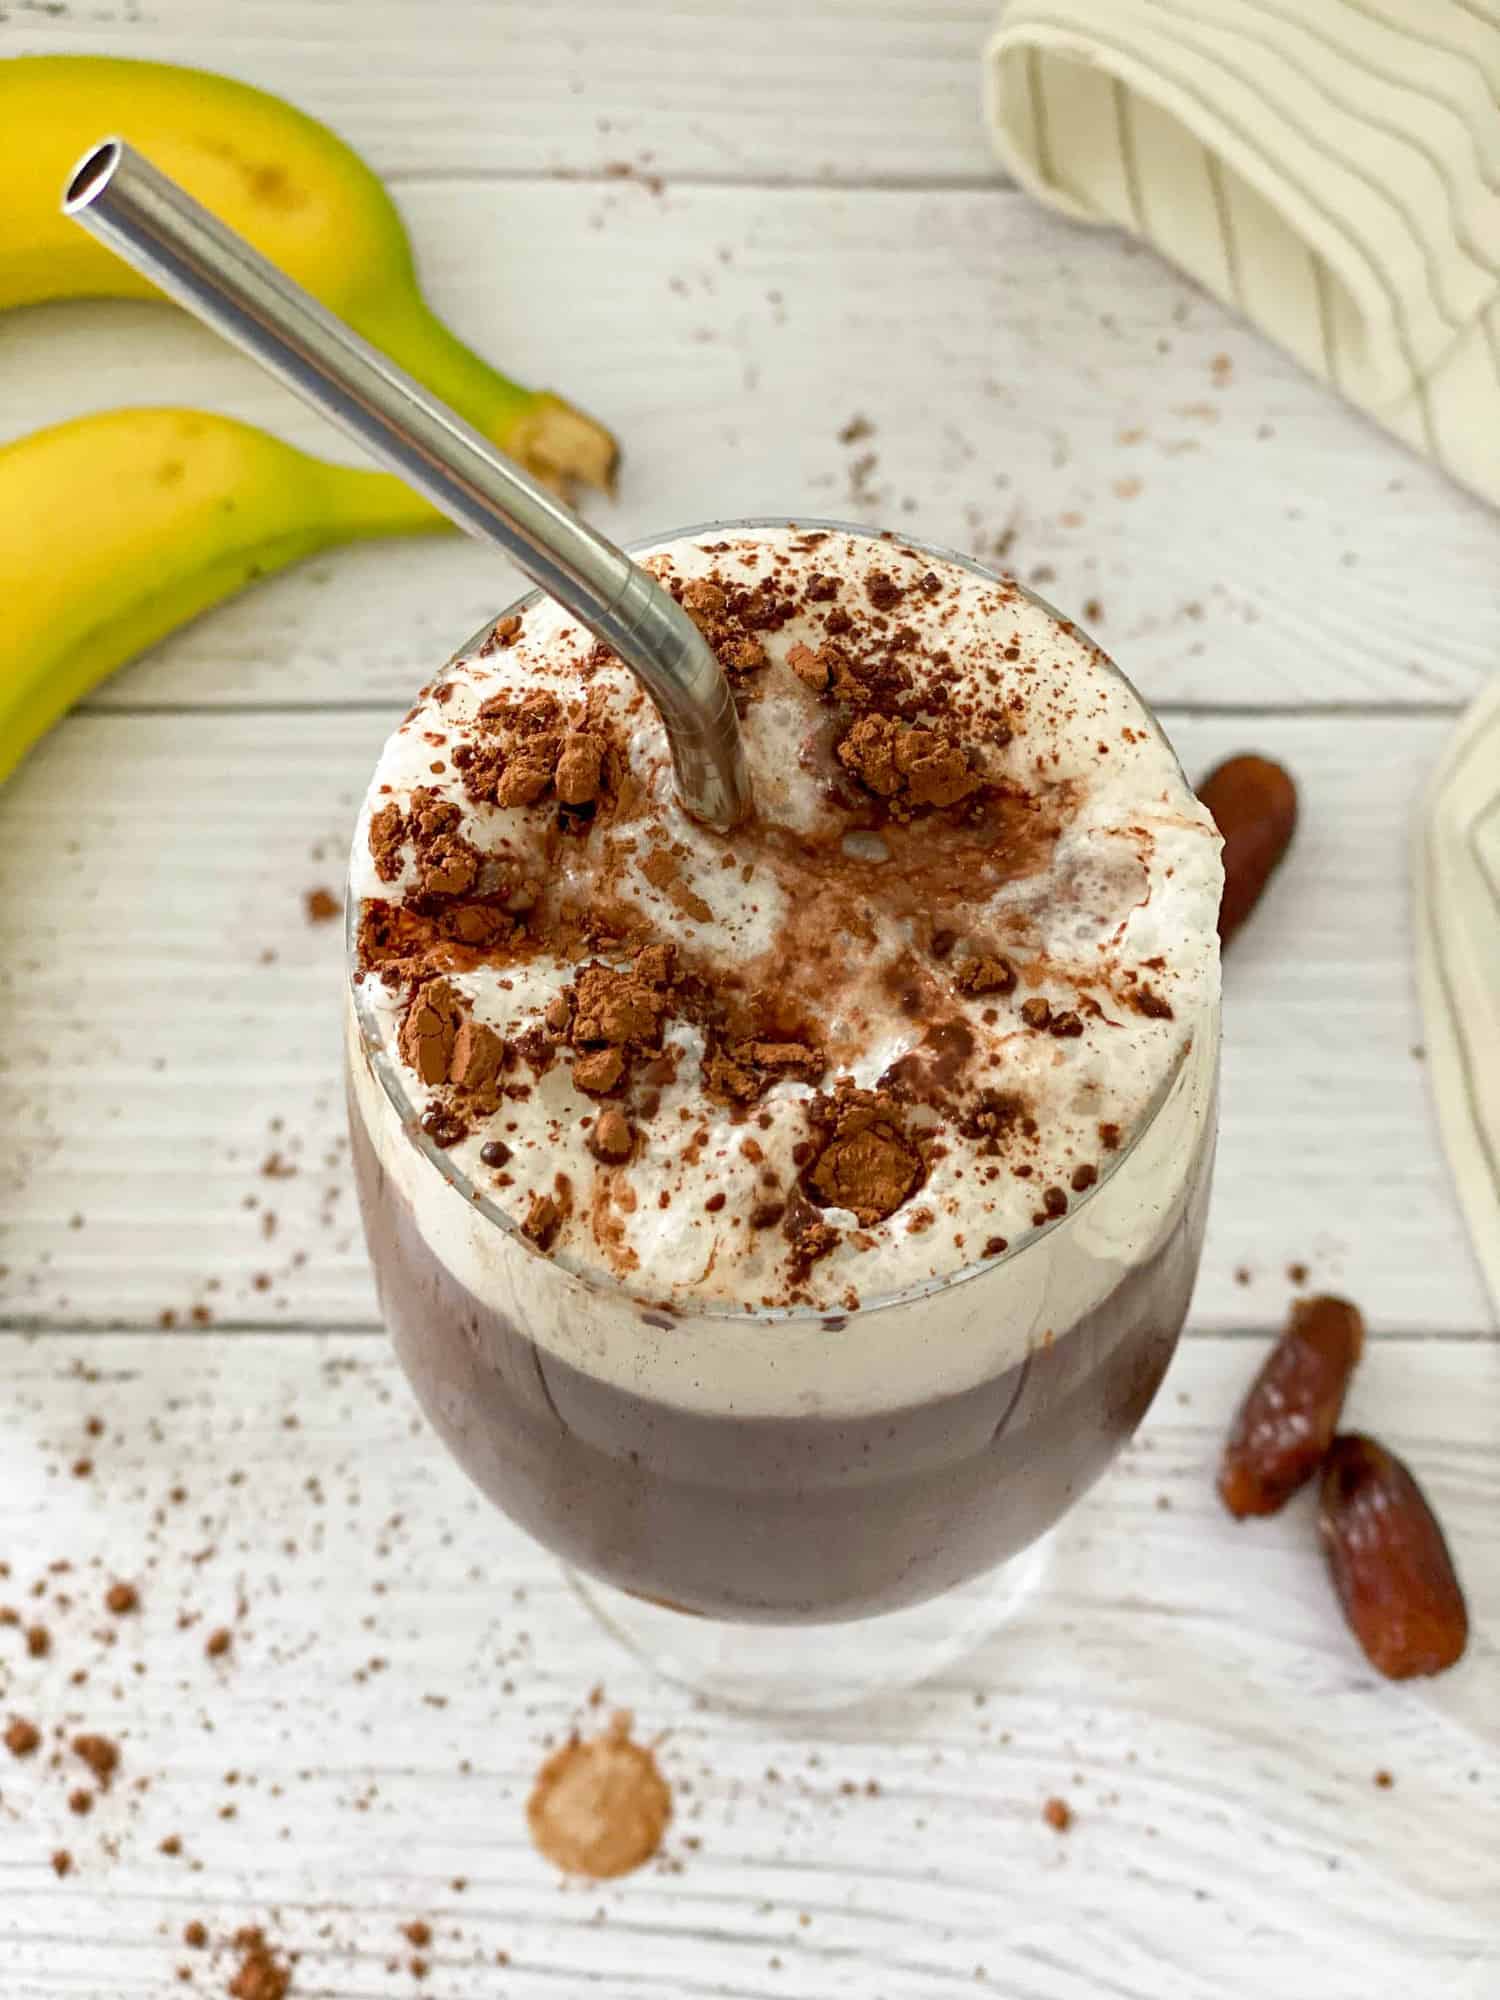 Metal straw inside glass of chocolate beverage with dates and bananas around it.